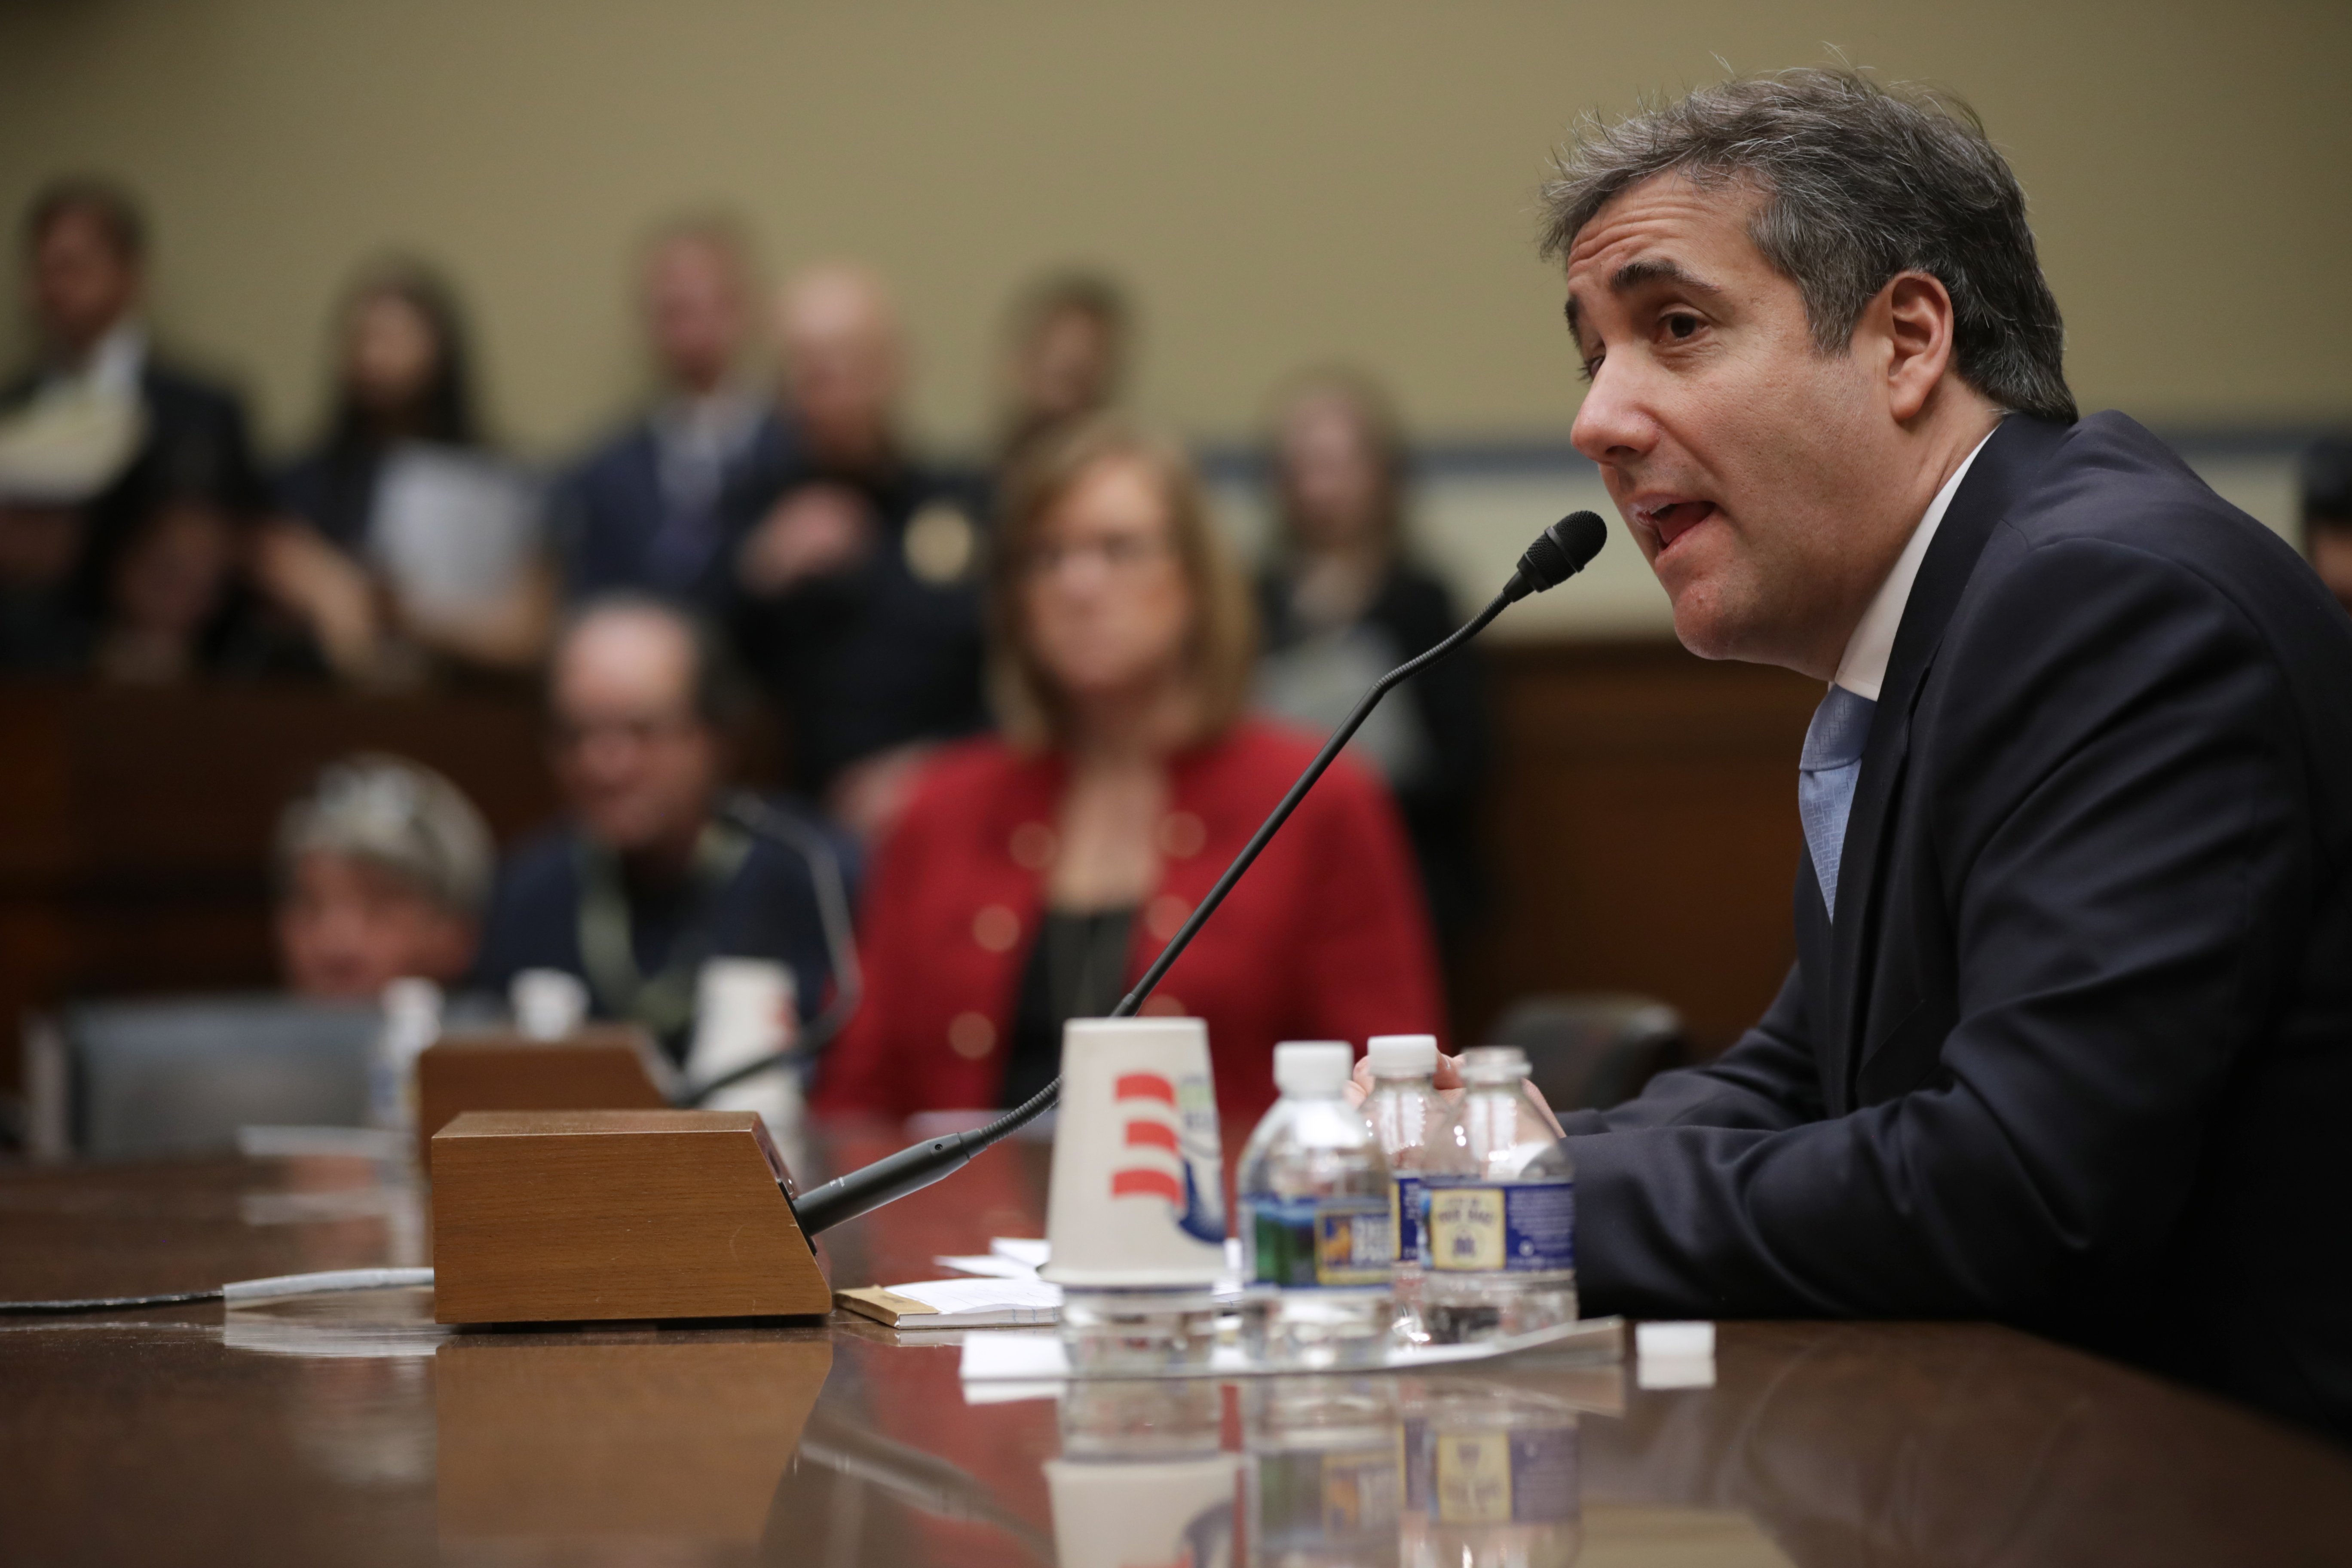 Michael Cohen, former attorney and fixer for President Donald Trump testiifying before the House Oversight Committee | Photo: Getty Images